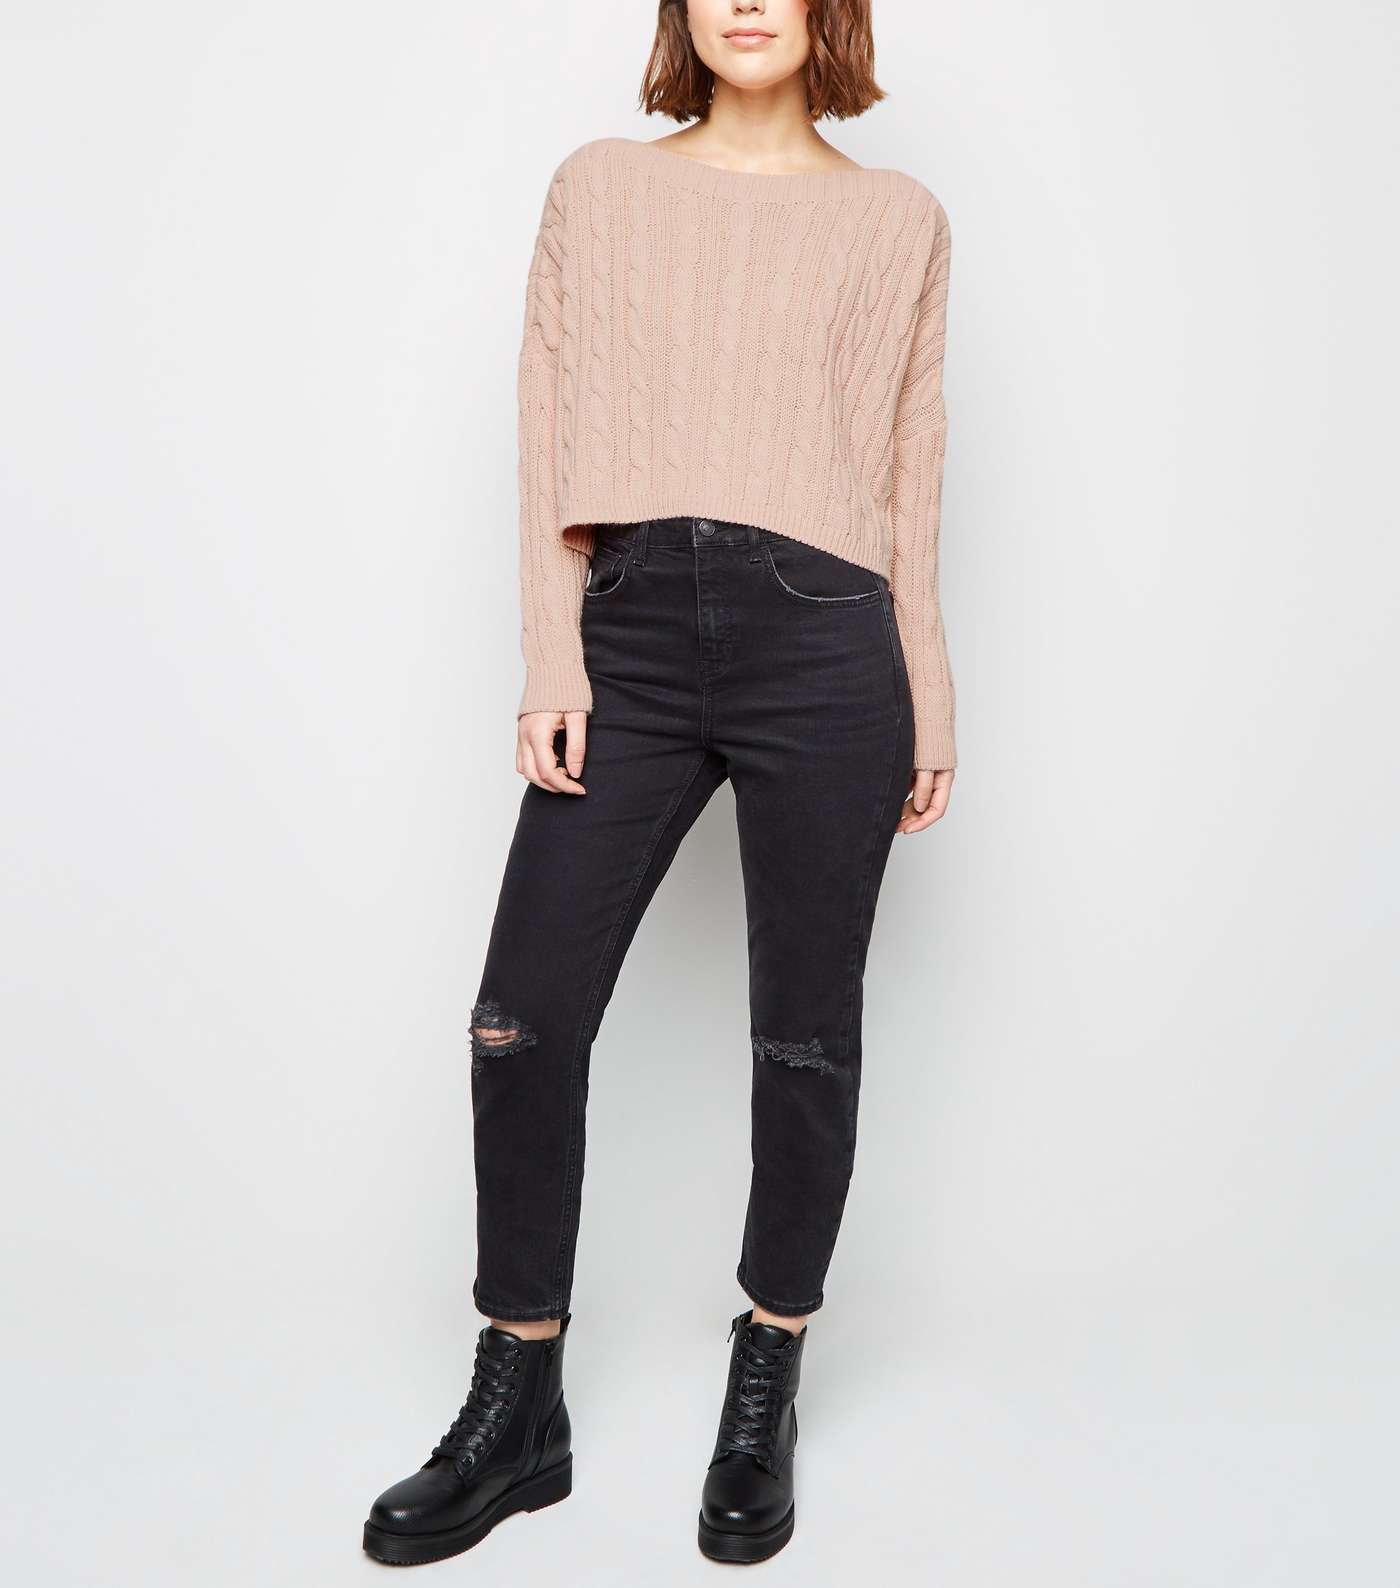 Cameo Rose Pale Pink Cable Knit Jumper Image 2